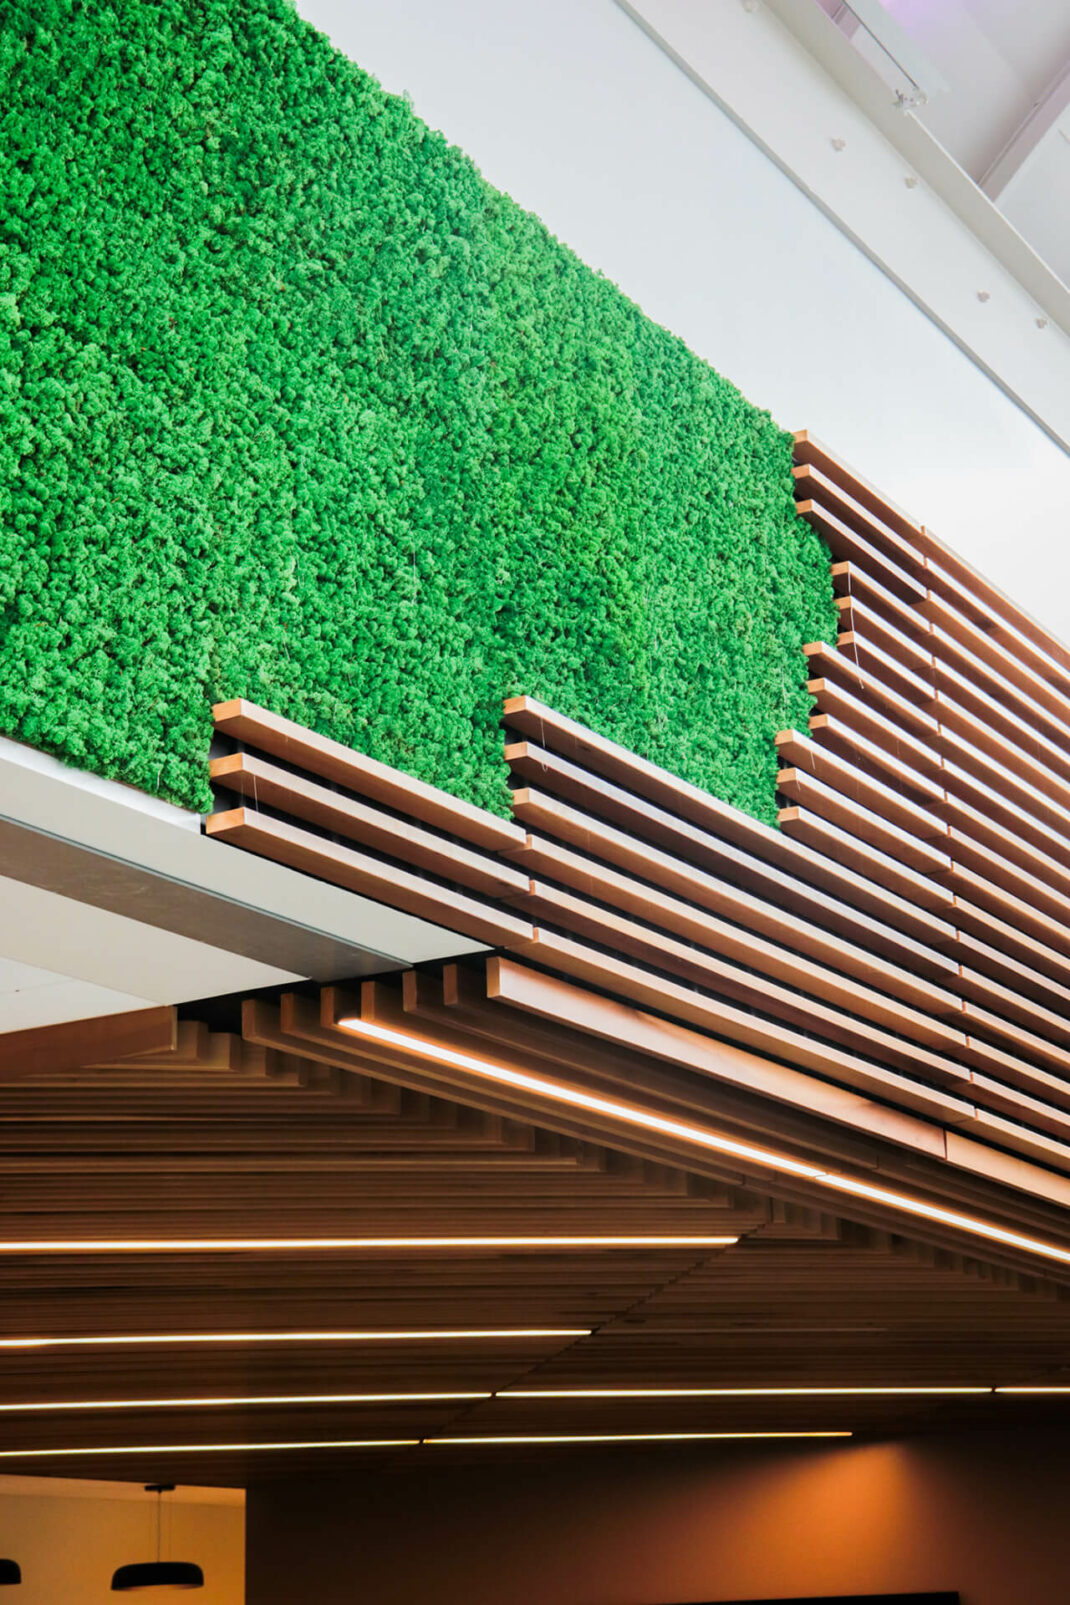 Armstrong Woodworks Grille and Green Mood Moss Wall - Pittsburgh